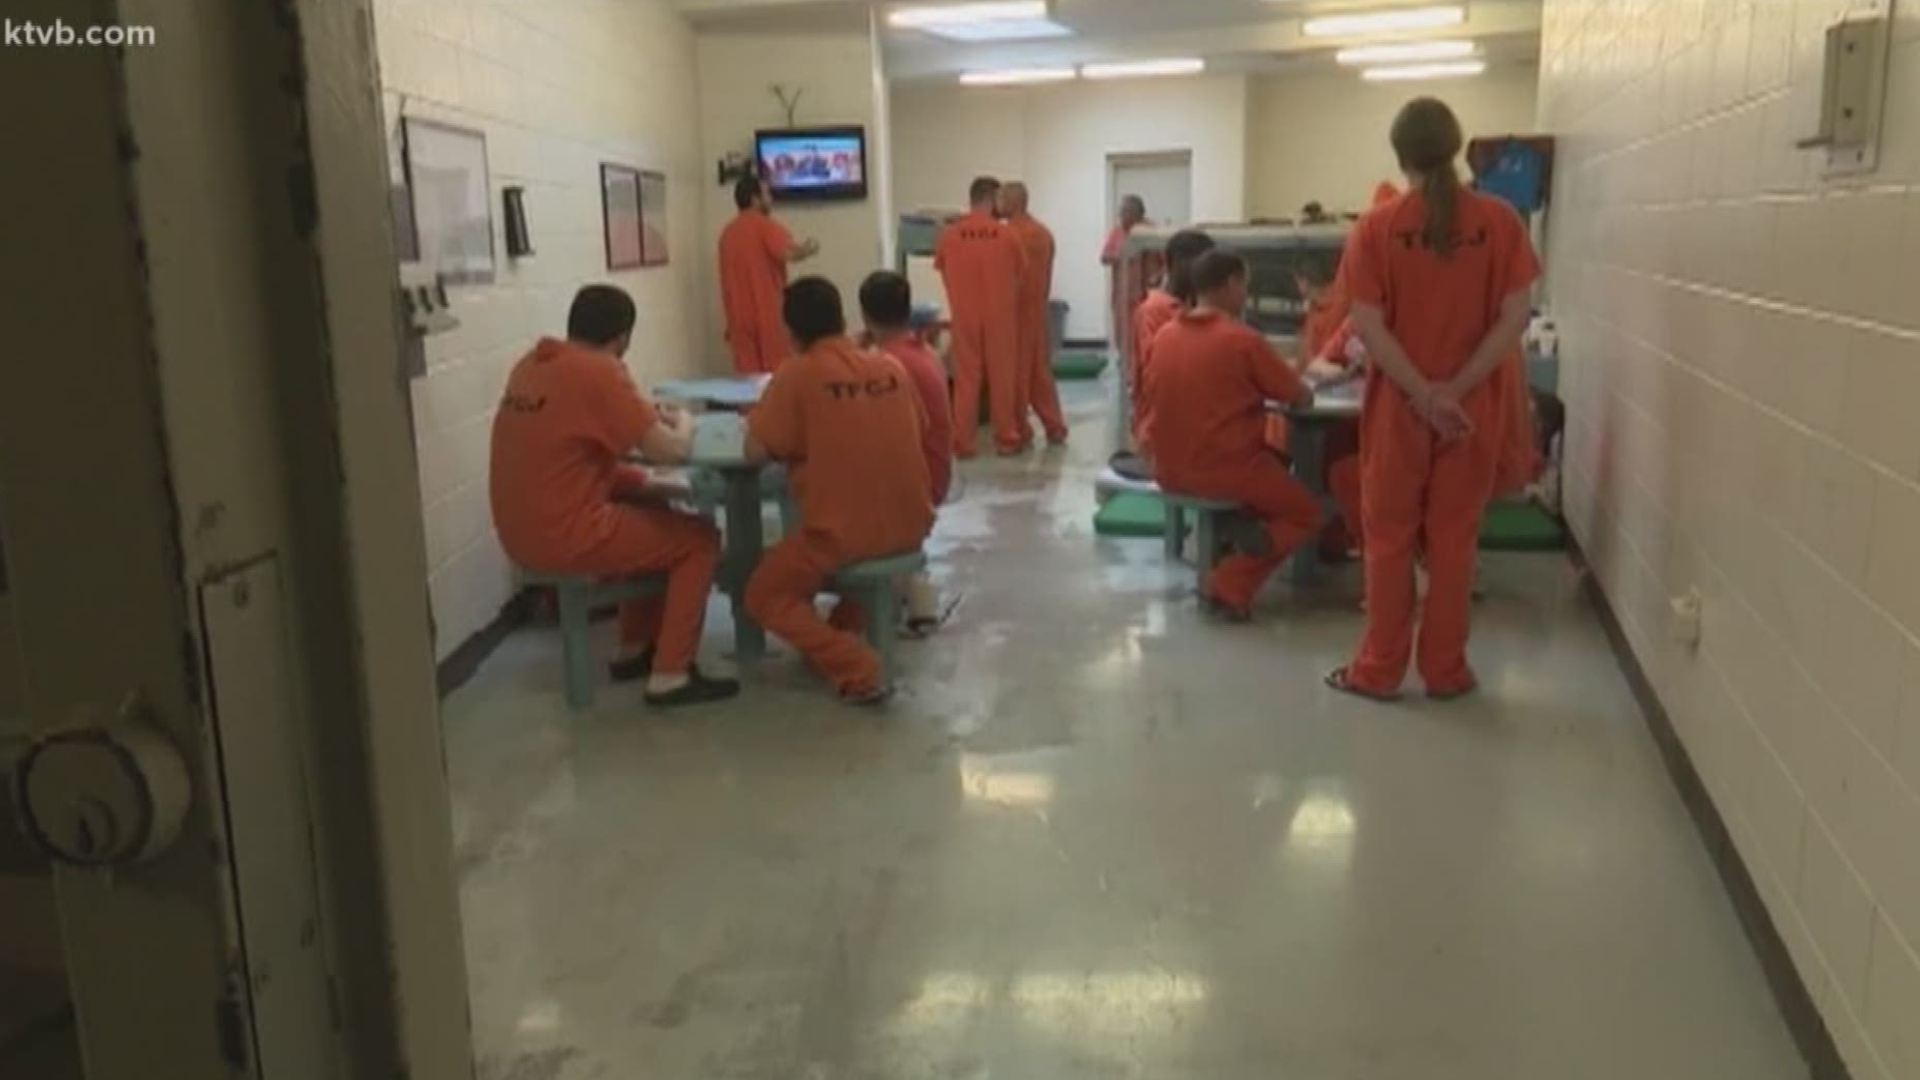 Twin Falls County searches for new plan to address overcrowding jail